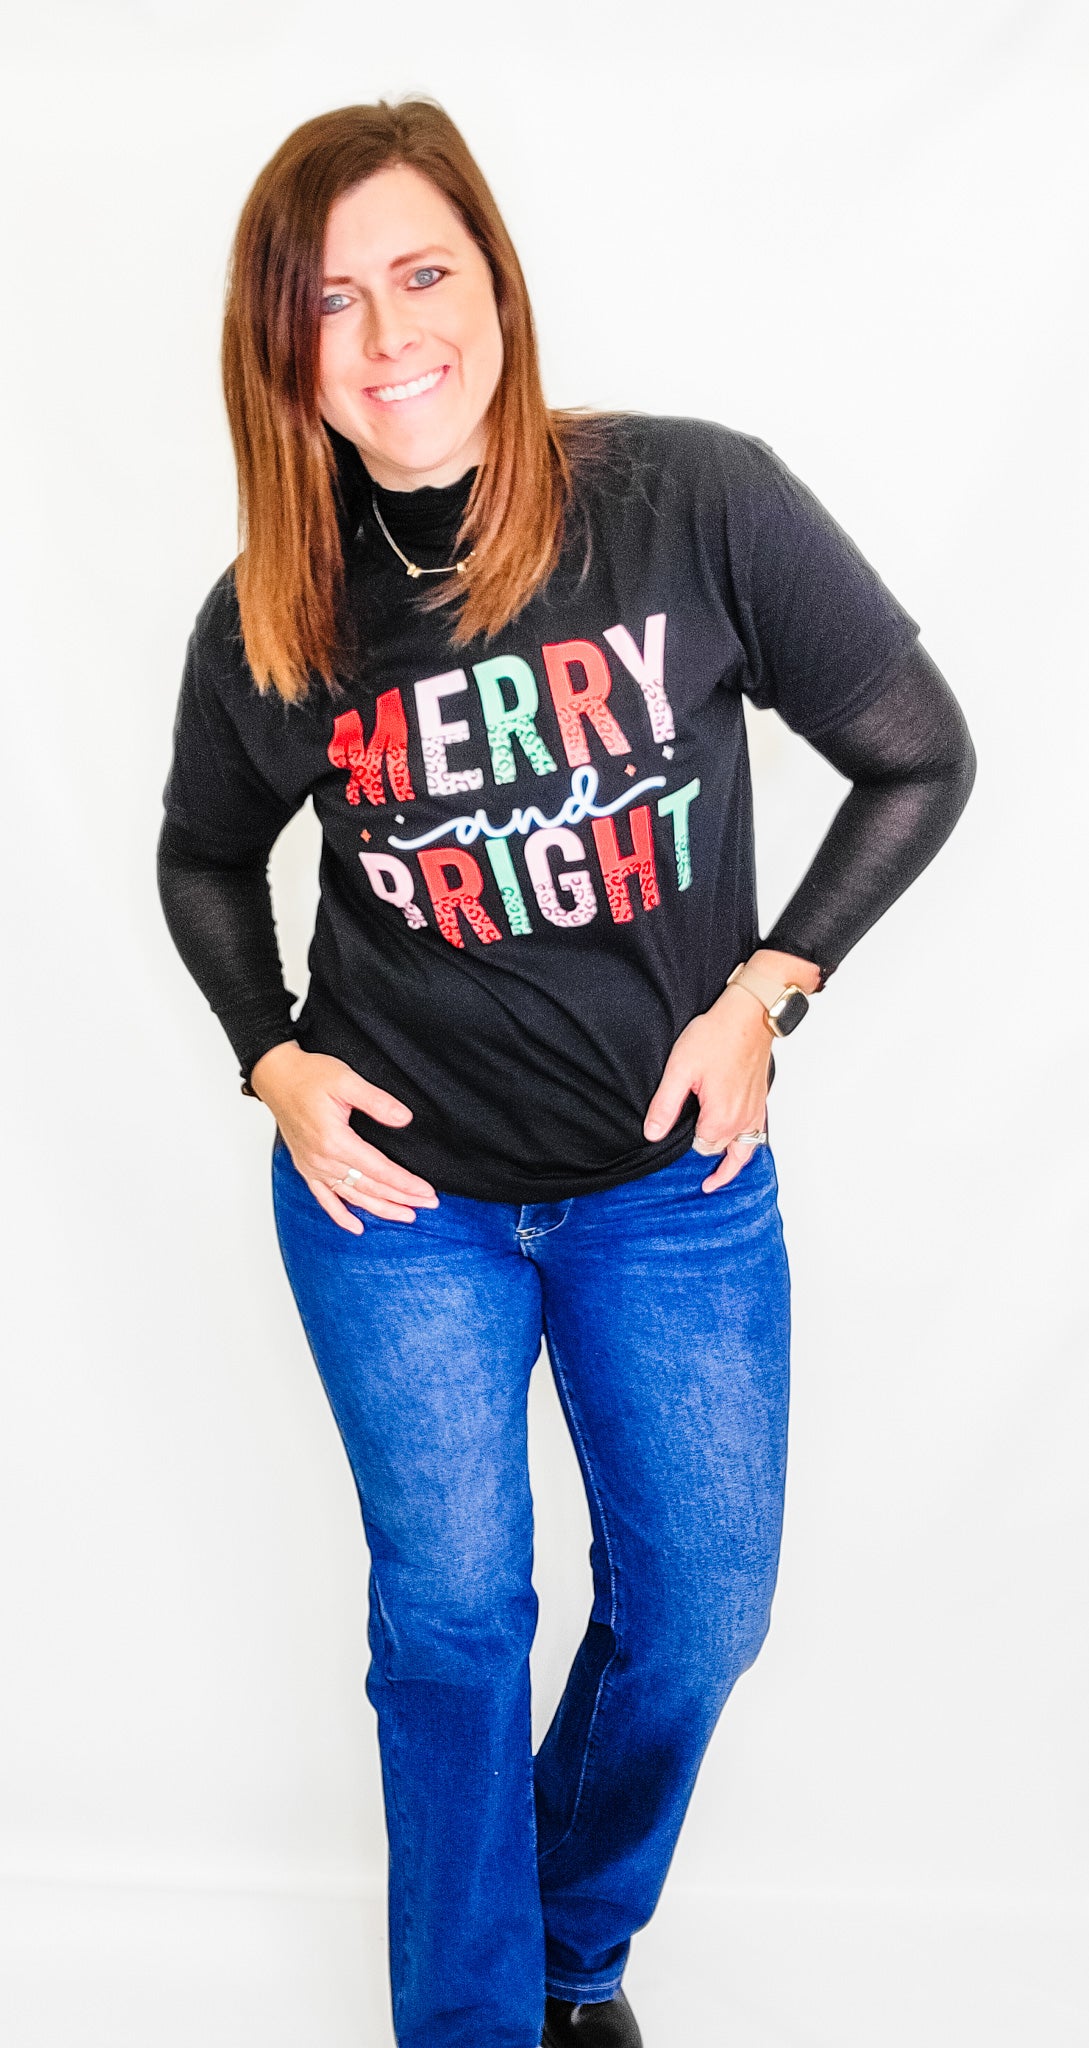 Merry & Bright, Colorful Graphic Tee - Variety